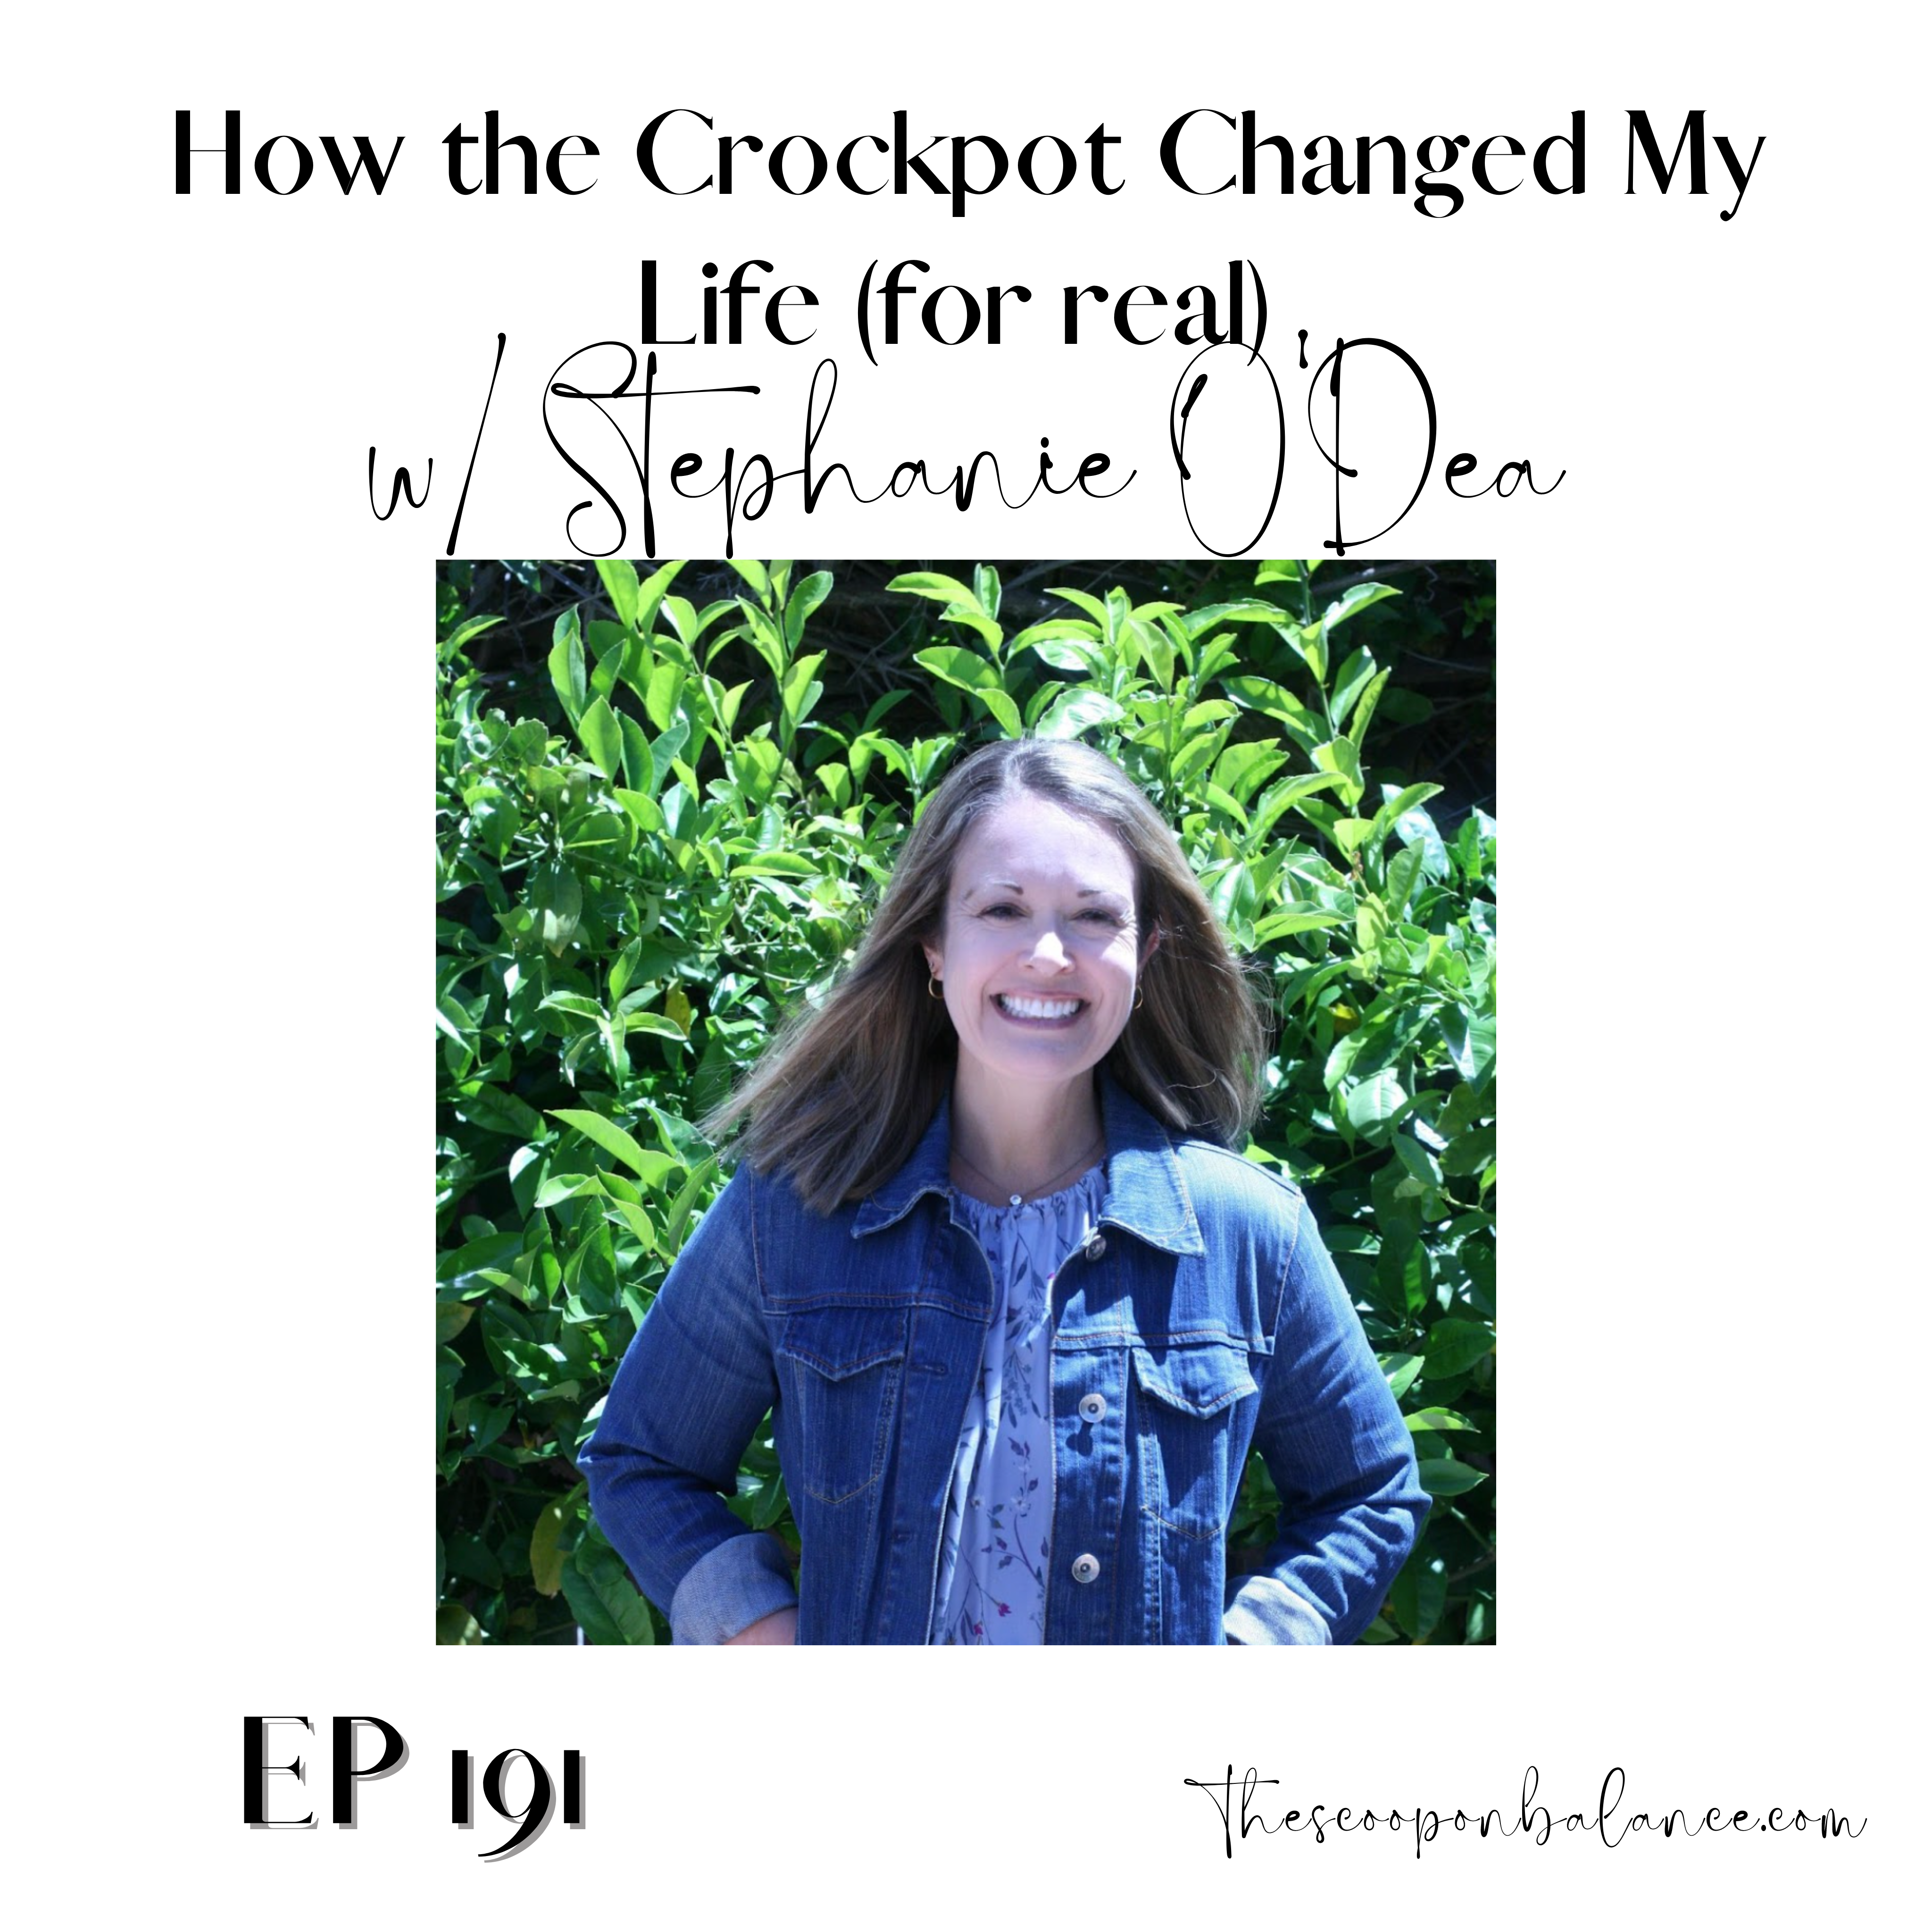 Ep 191: How the Crockpot Changed My Life (for real) with Stephanie O’Dea